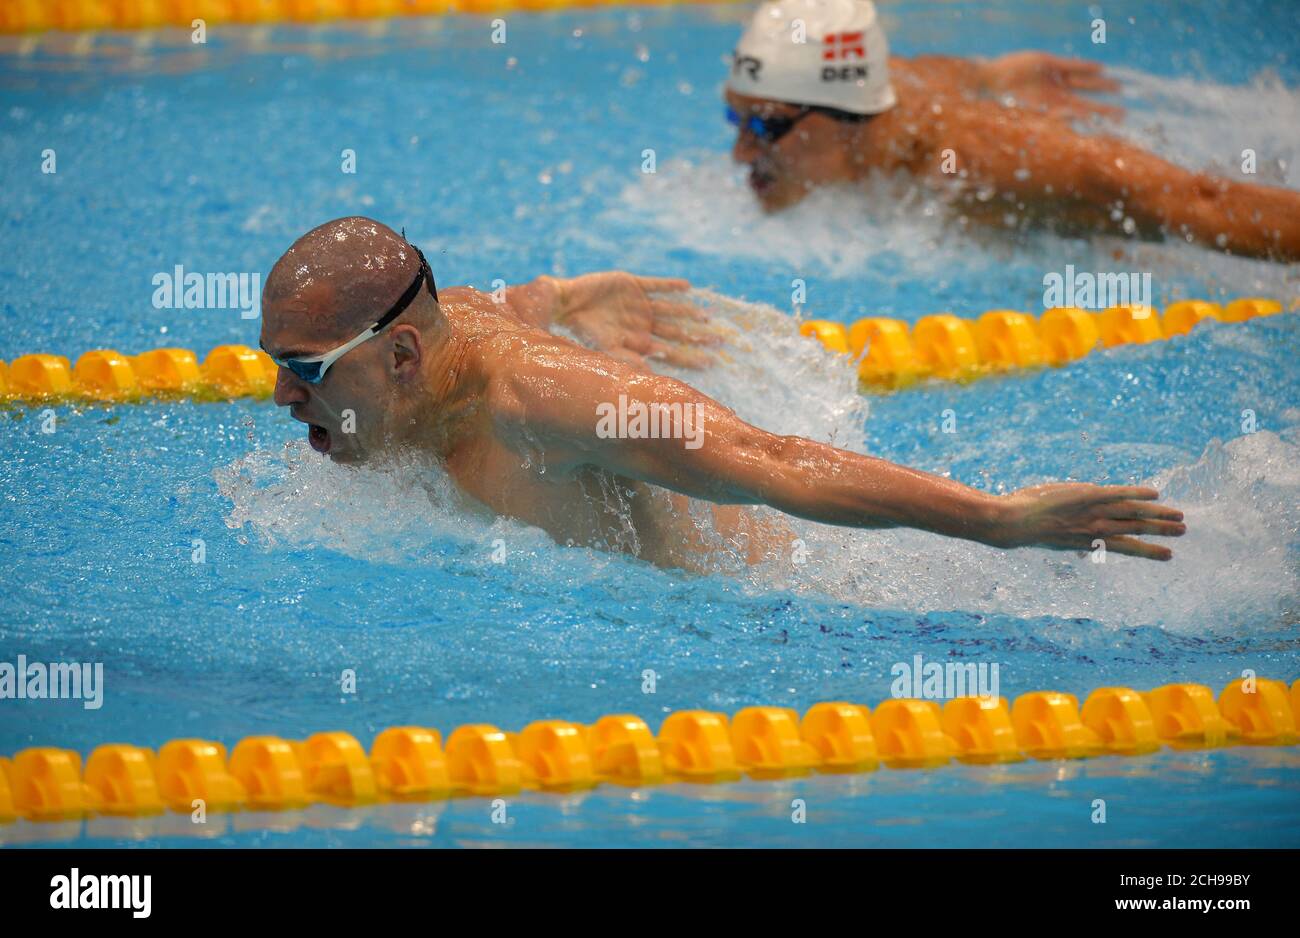 Hungary's Laszlo Cseh competes in the Men's 200m Butterfly Semi Final during day ten of the European Aquatics Championships at the London Aquatics Centre, Stratford. Stock Photo